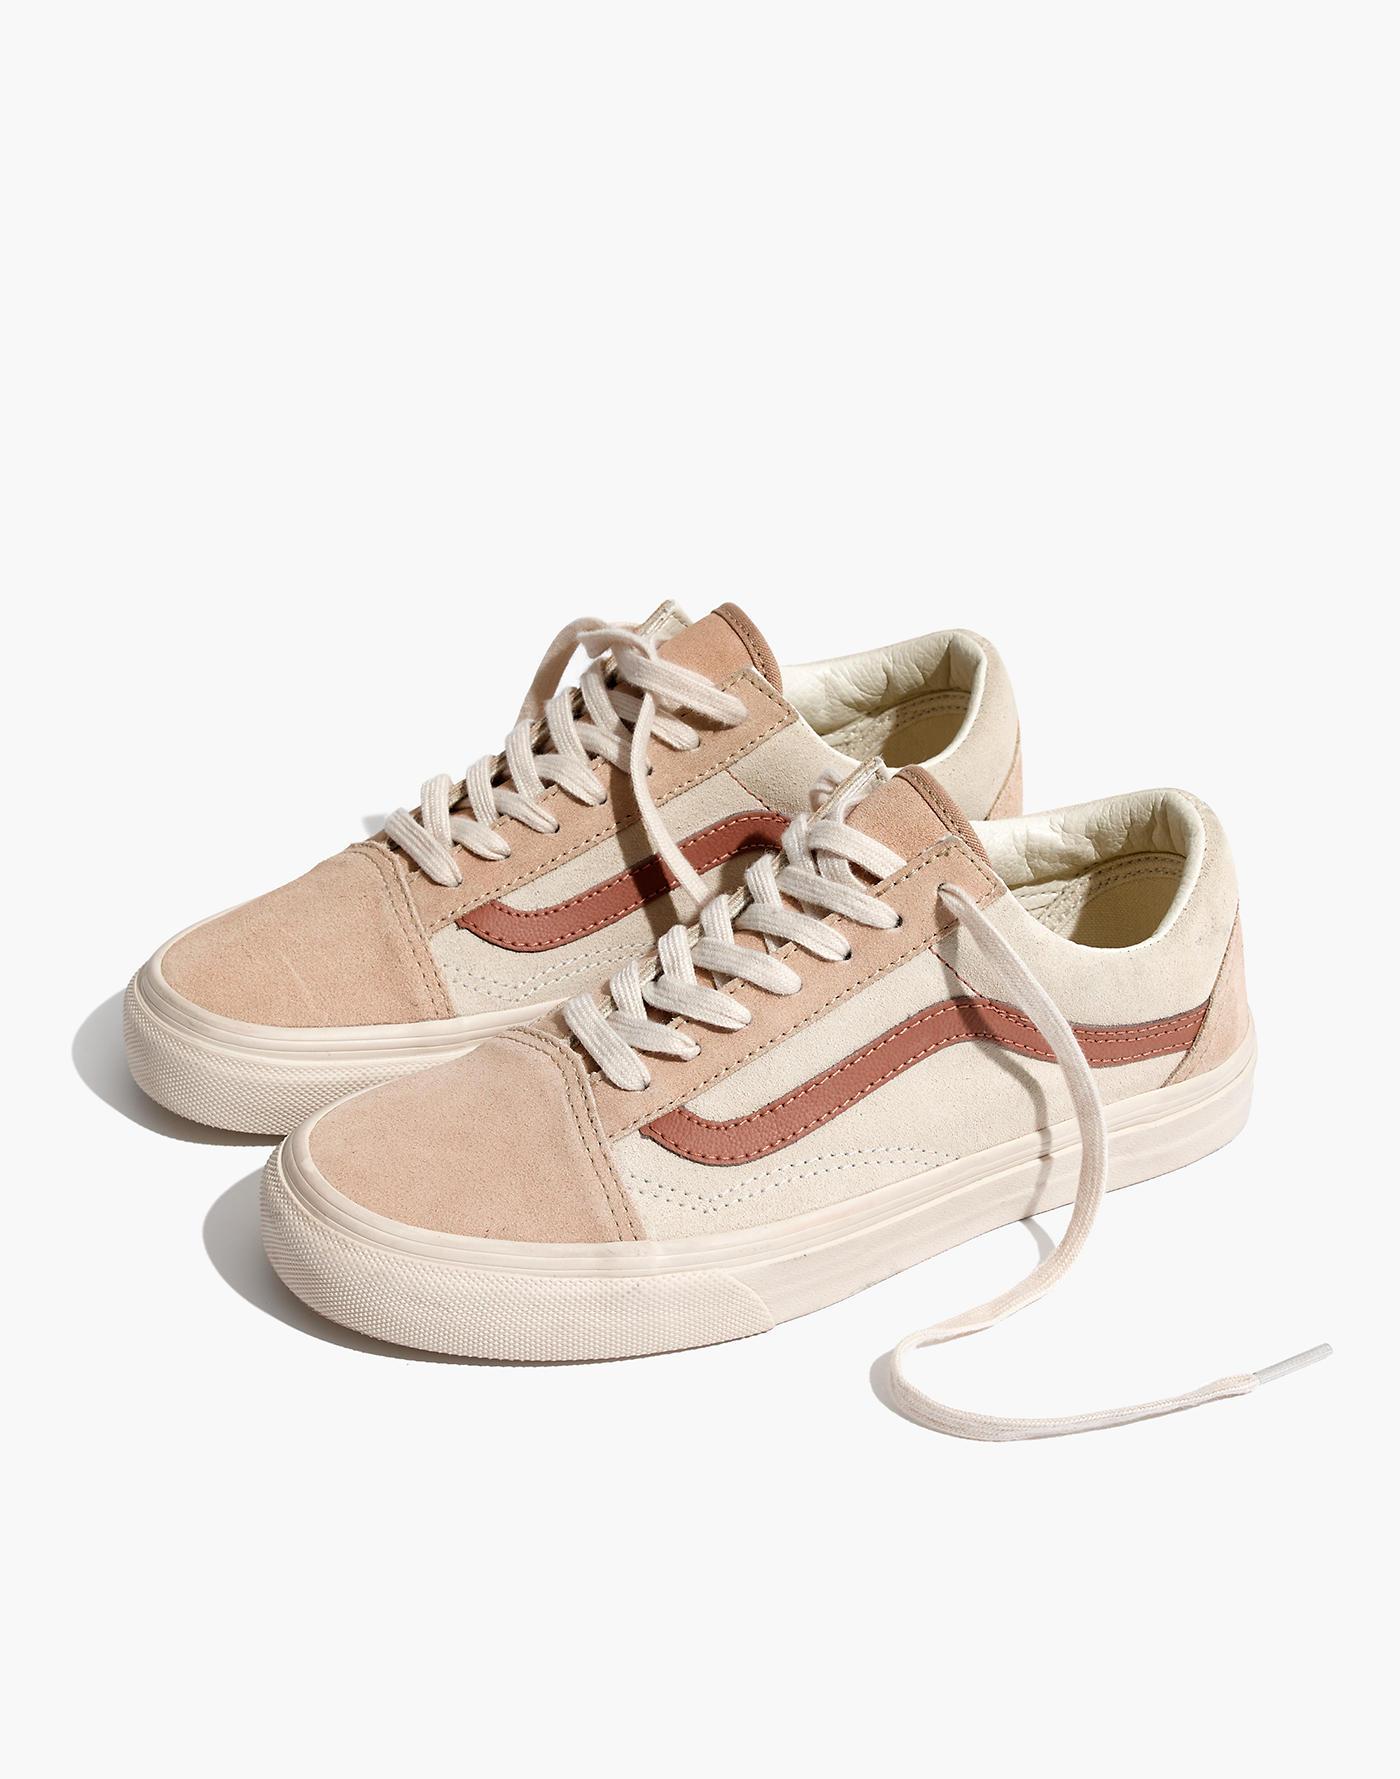 Madewell X Vans Unisex Old Skool Lace-up Sneakers In Colorblock in Natural - Lyst